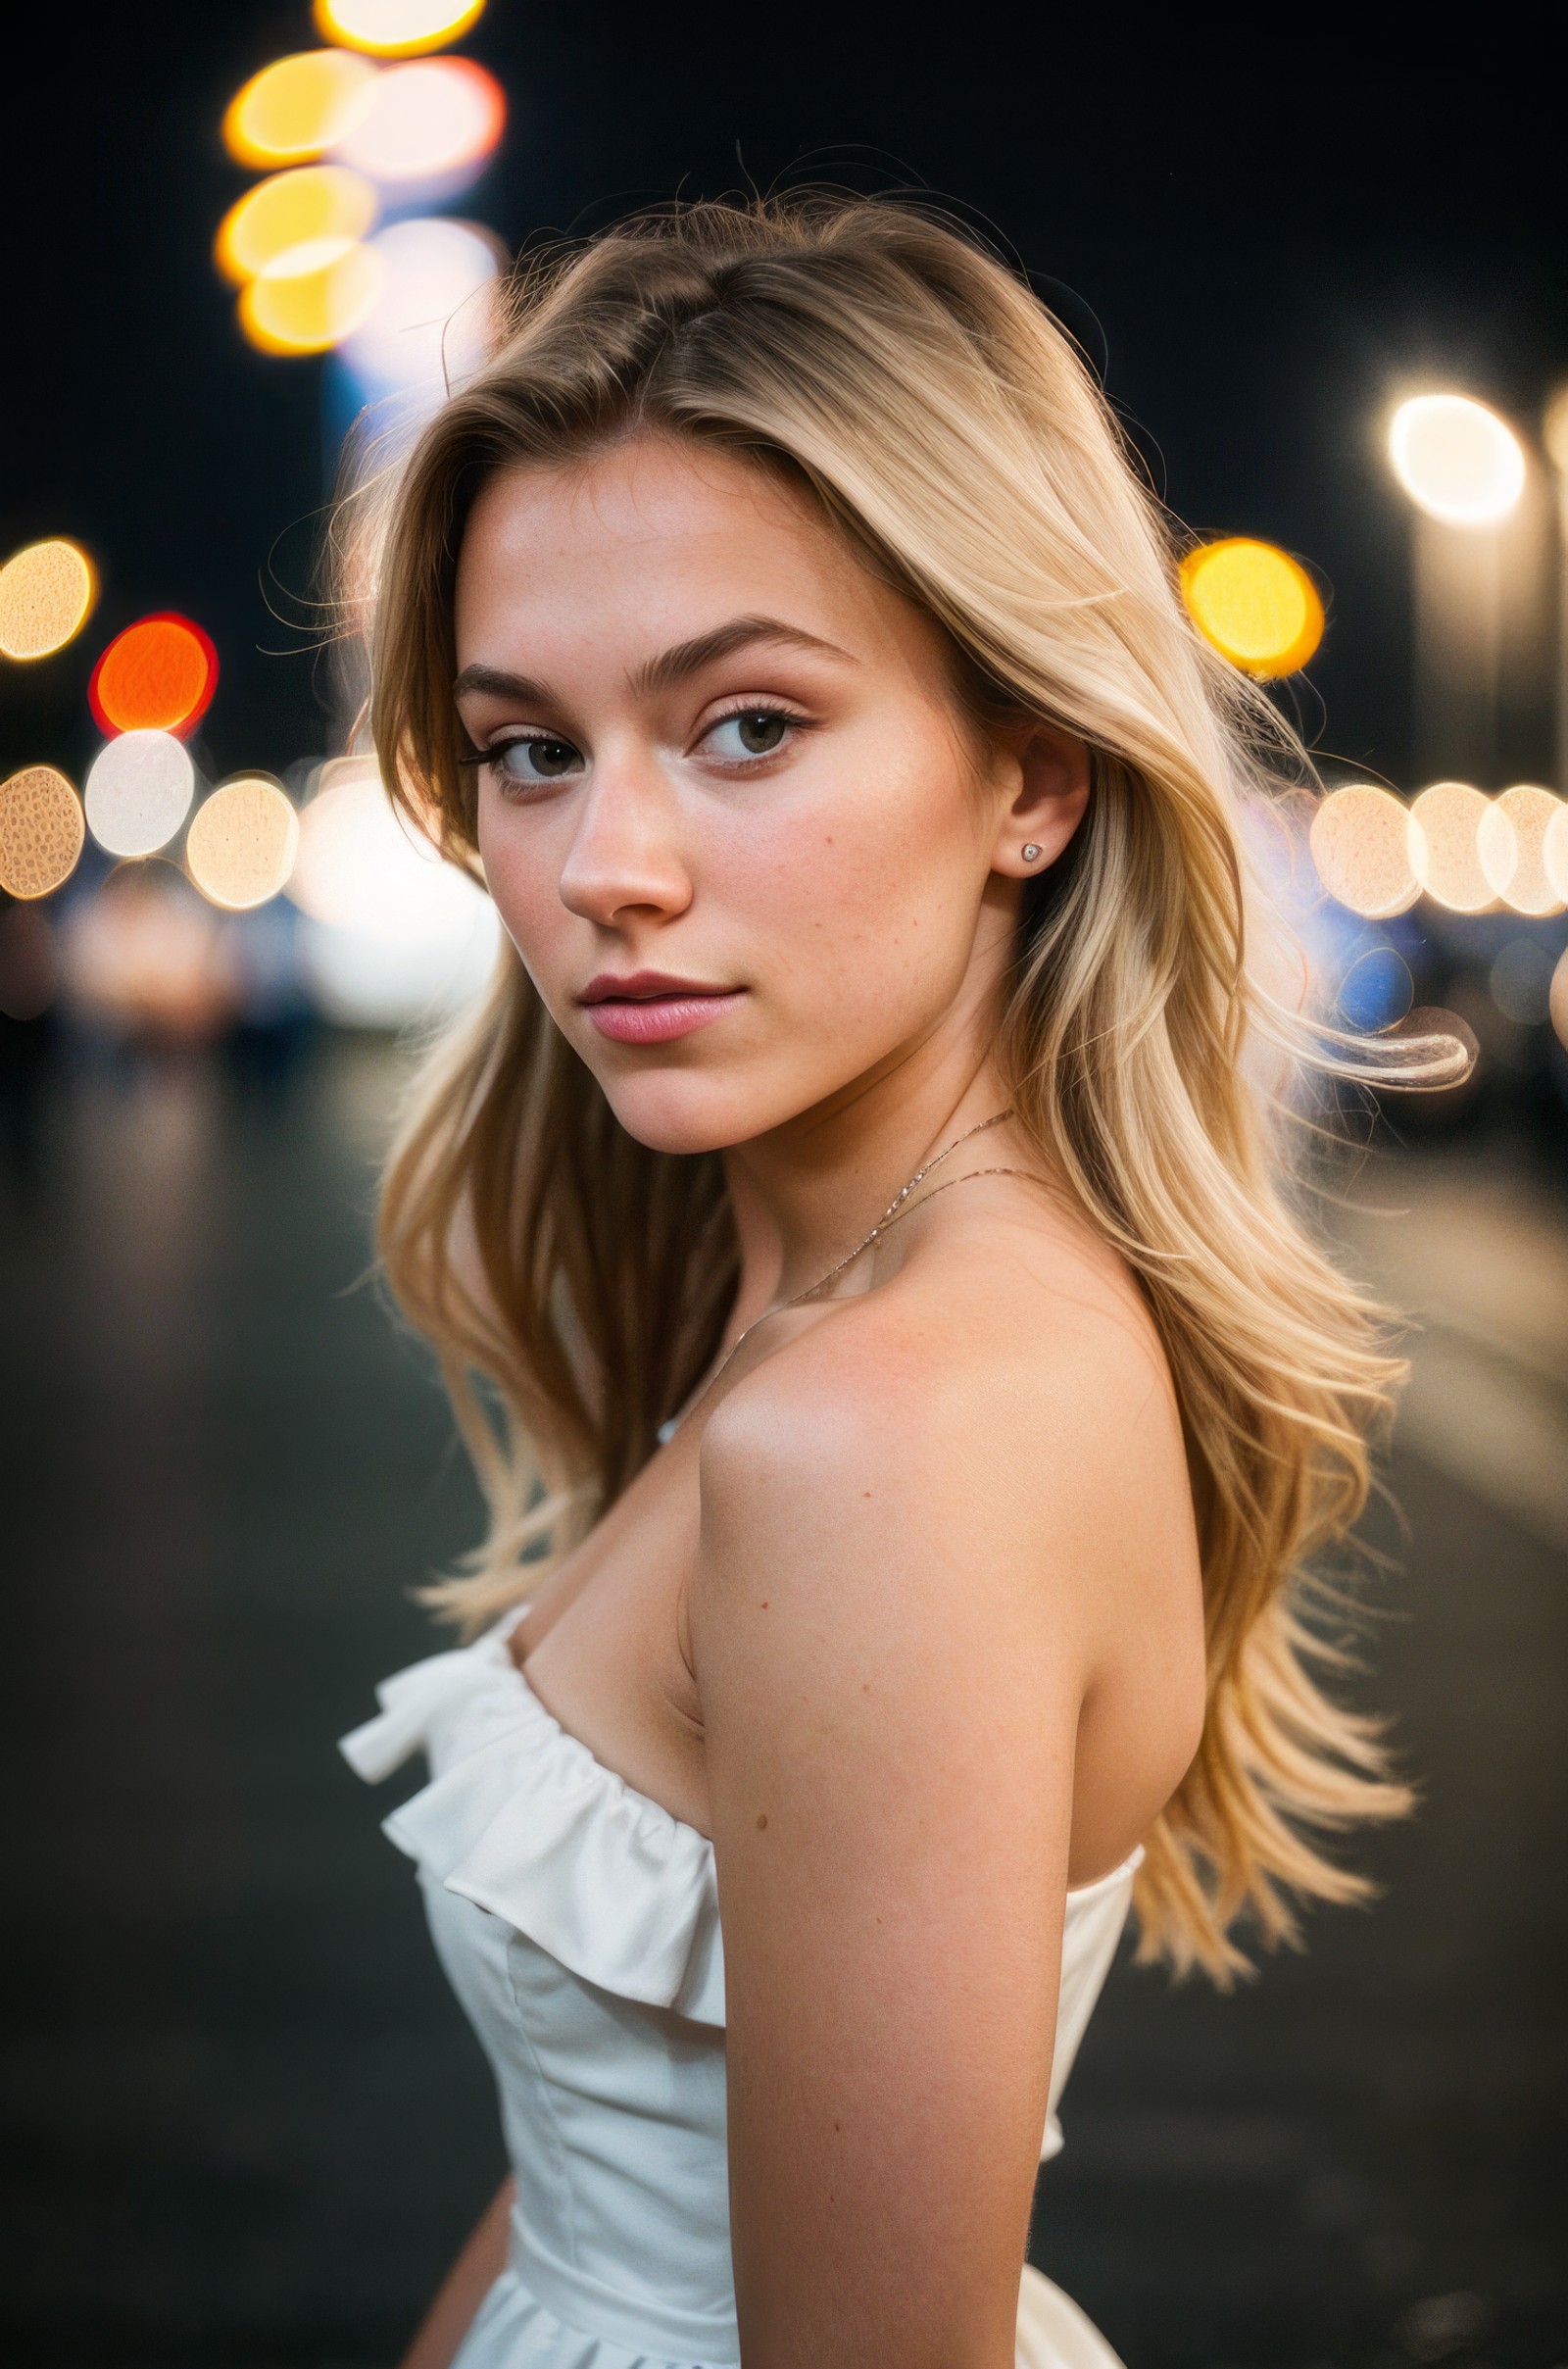 instagram photo, closeup face photo of  a young dutch woman in dress, CySterre_V1, beautiful face, makeup, night city stre...